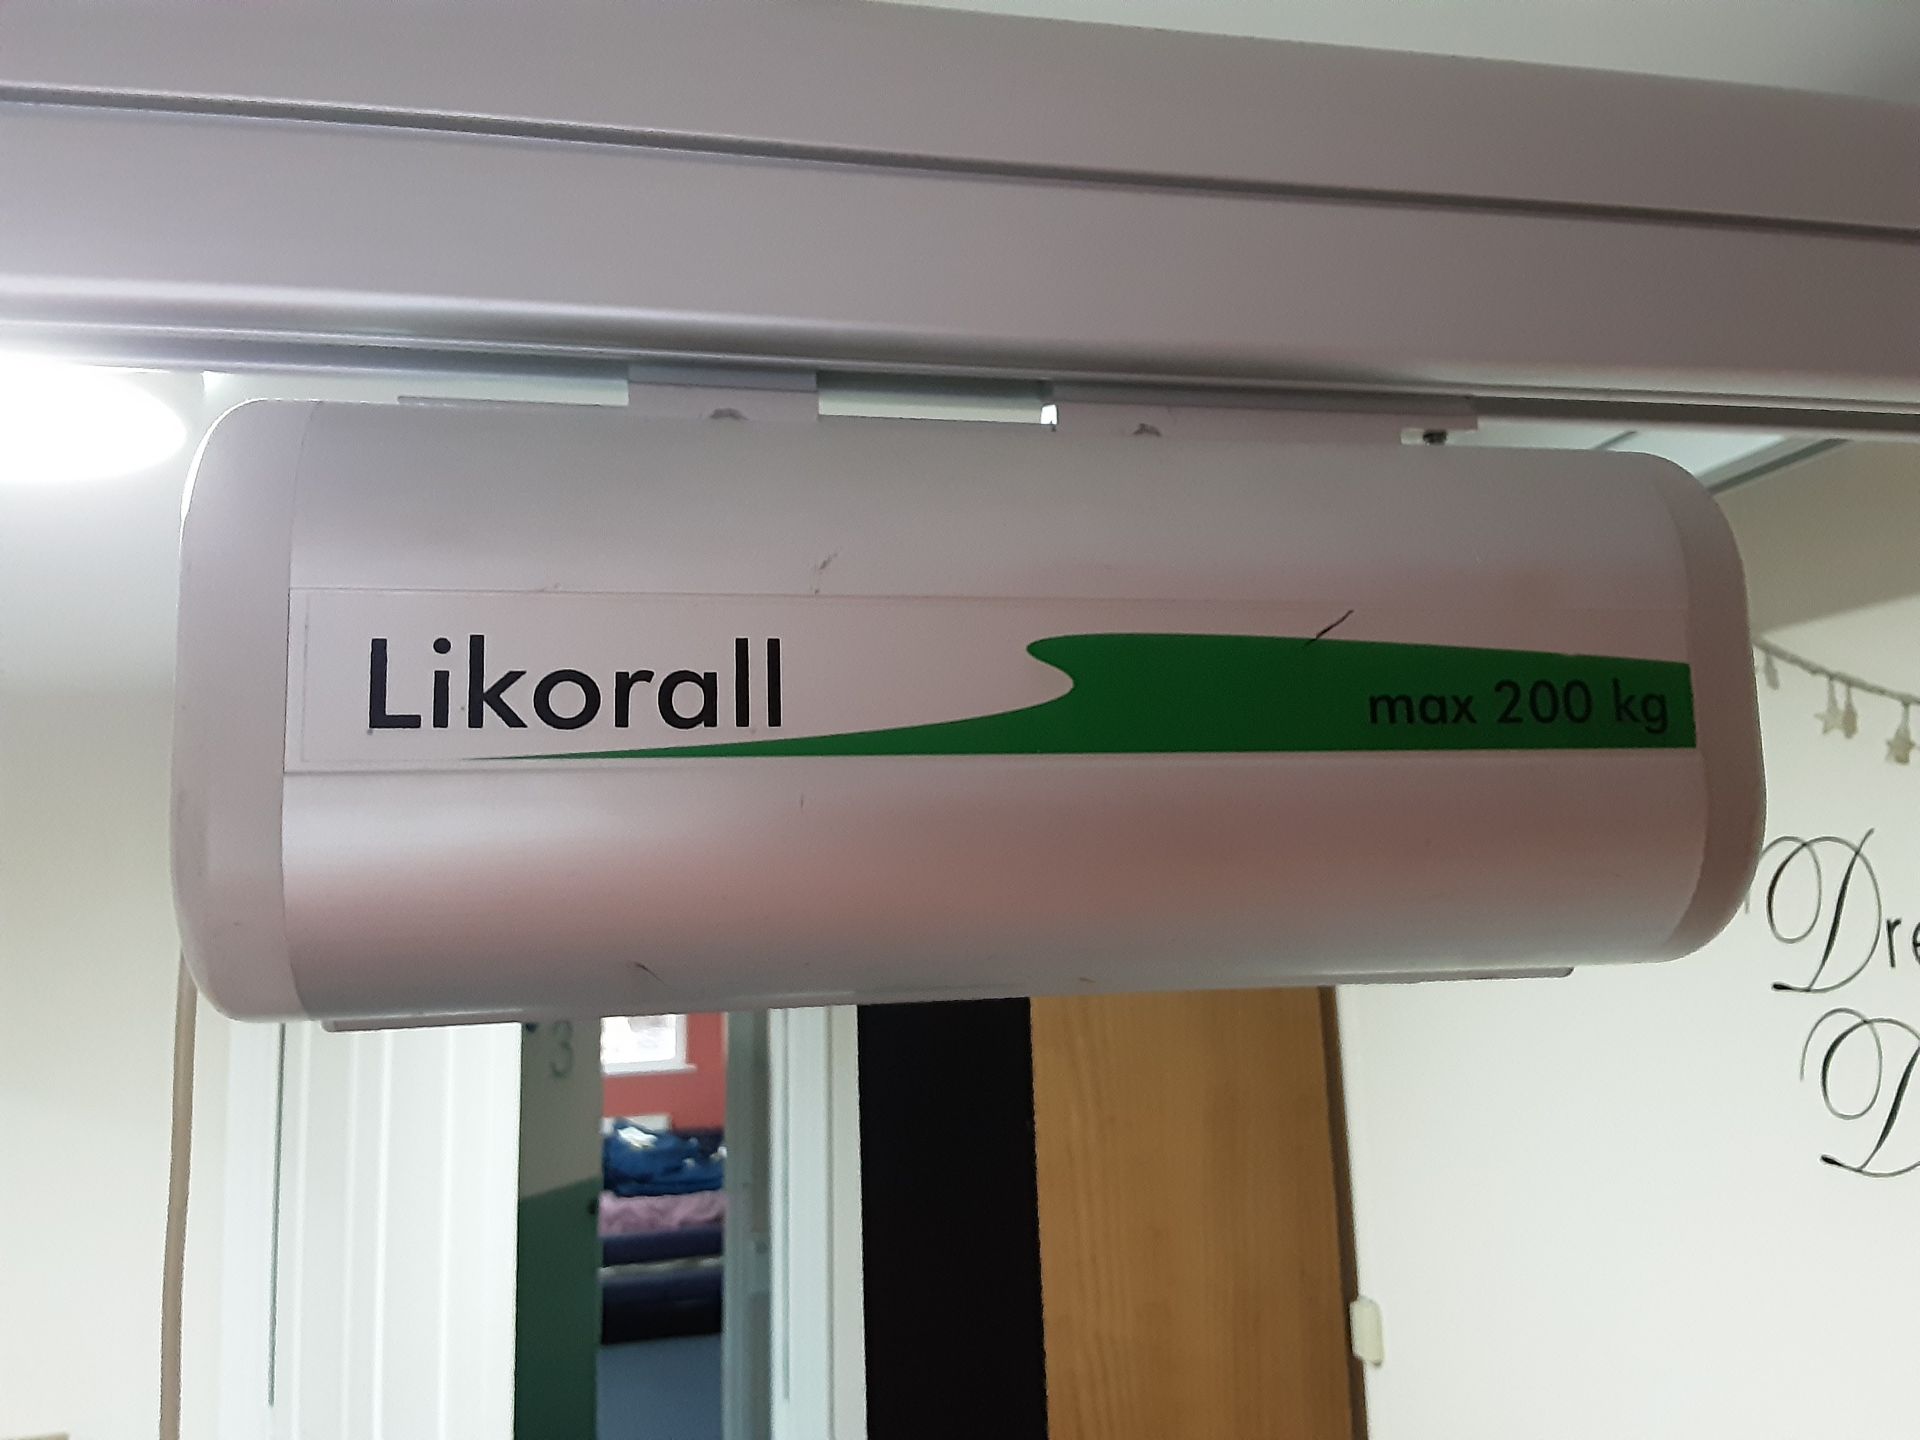 Likorall 242S R2R 200kg Patient Lift with KwikTrak Ceiling Rail System Serial No: 260865 - Image 8 of 10